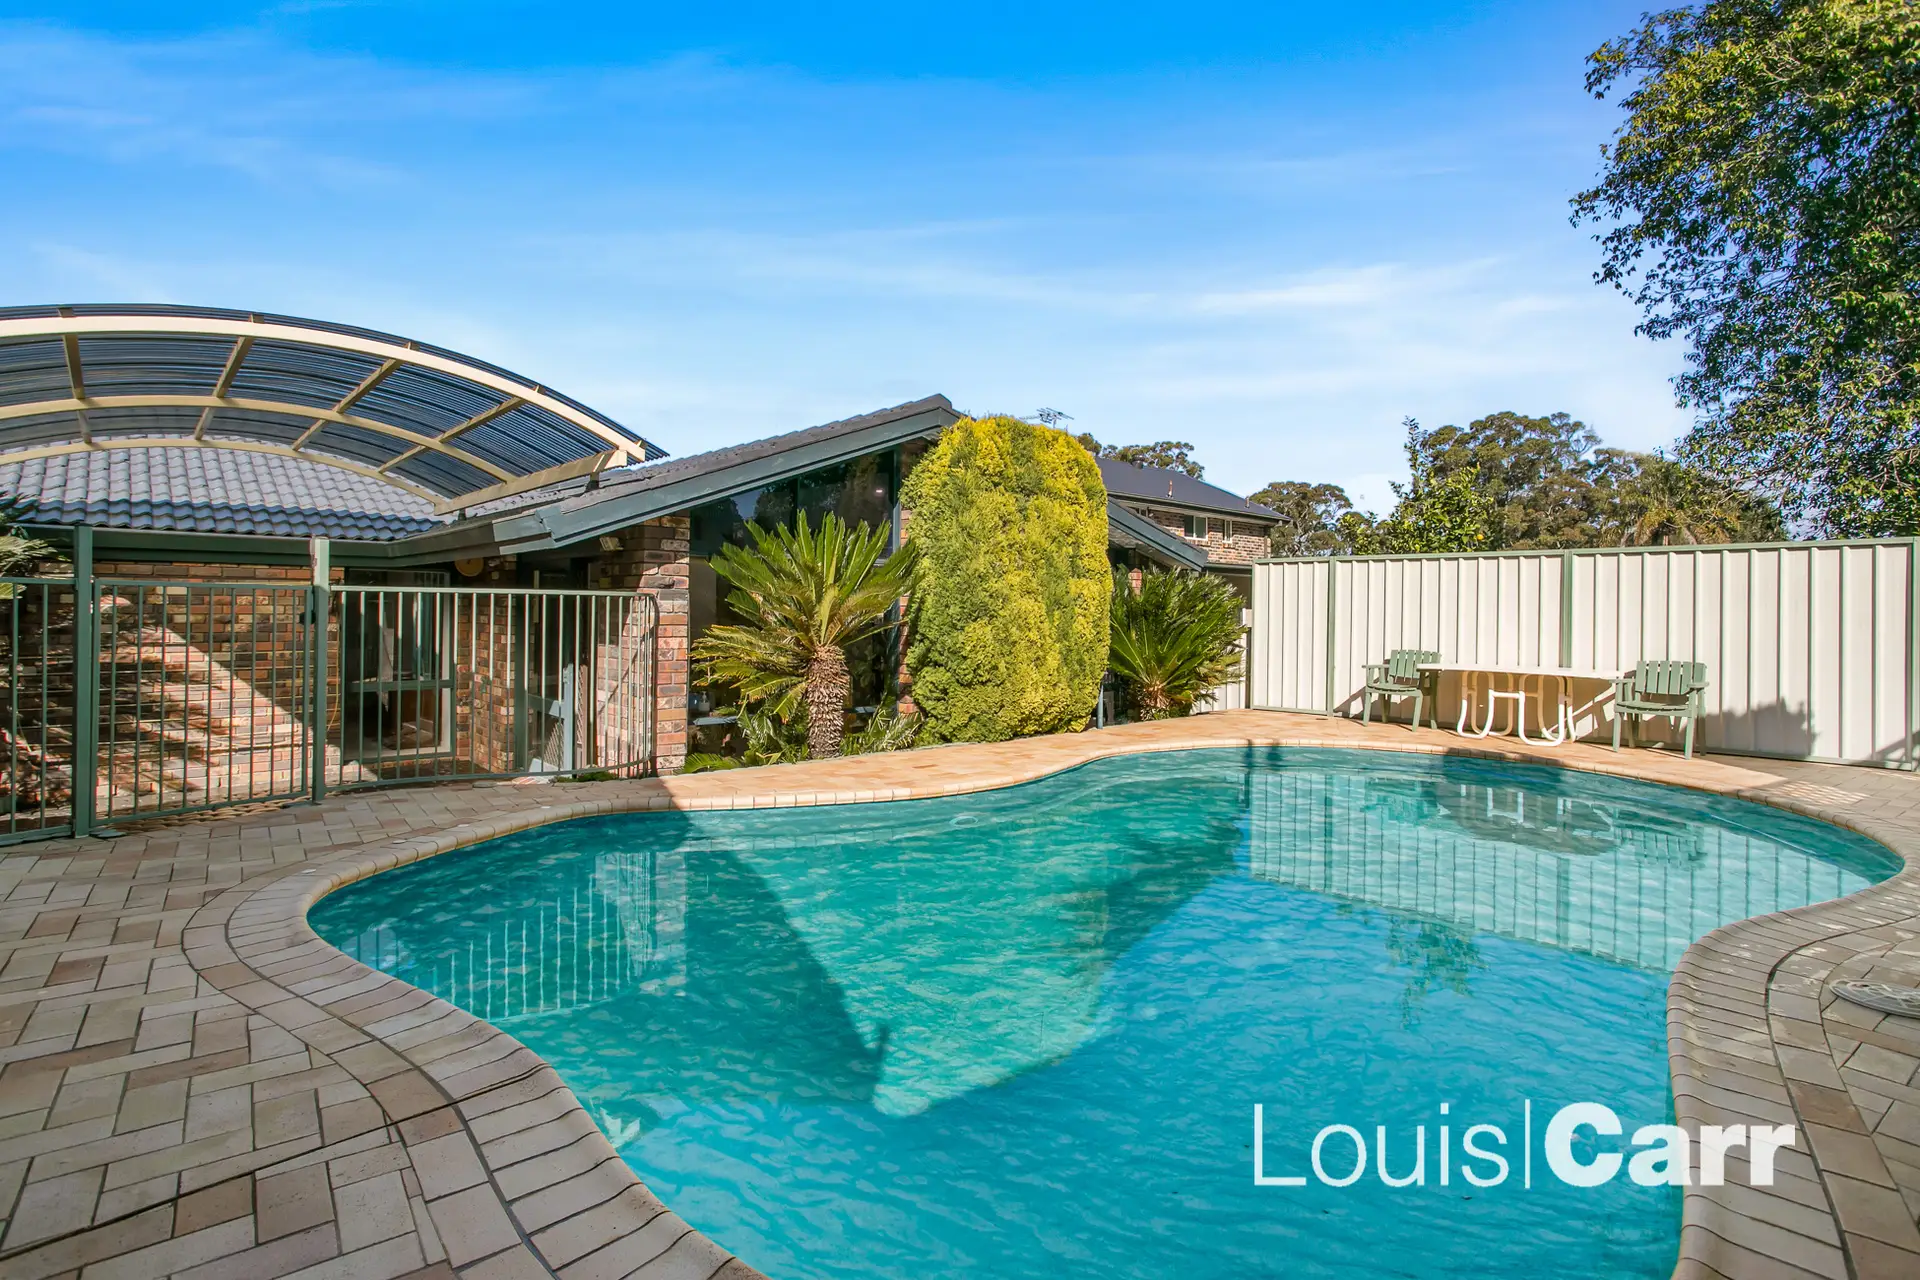 Photo #6: 41 Francis Greenway Drive, Cherrybrook - Sold by Louis Carr Real Estate